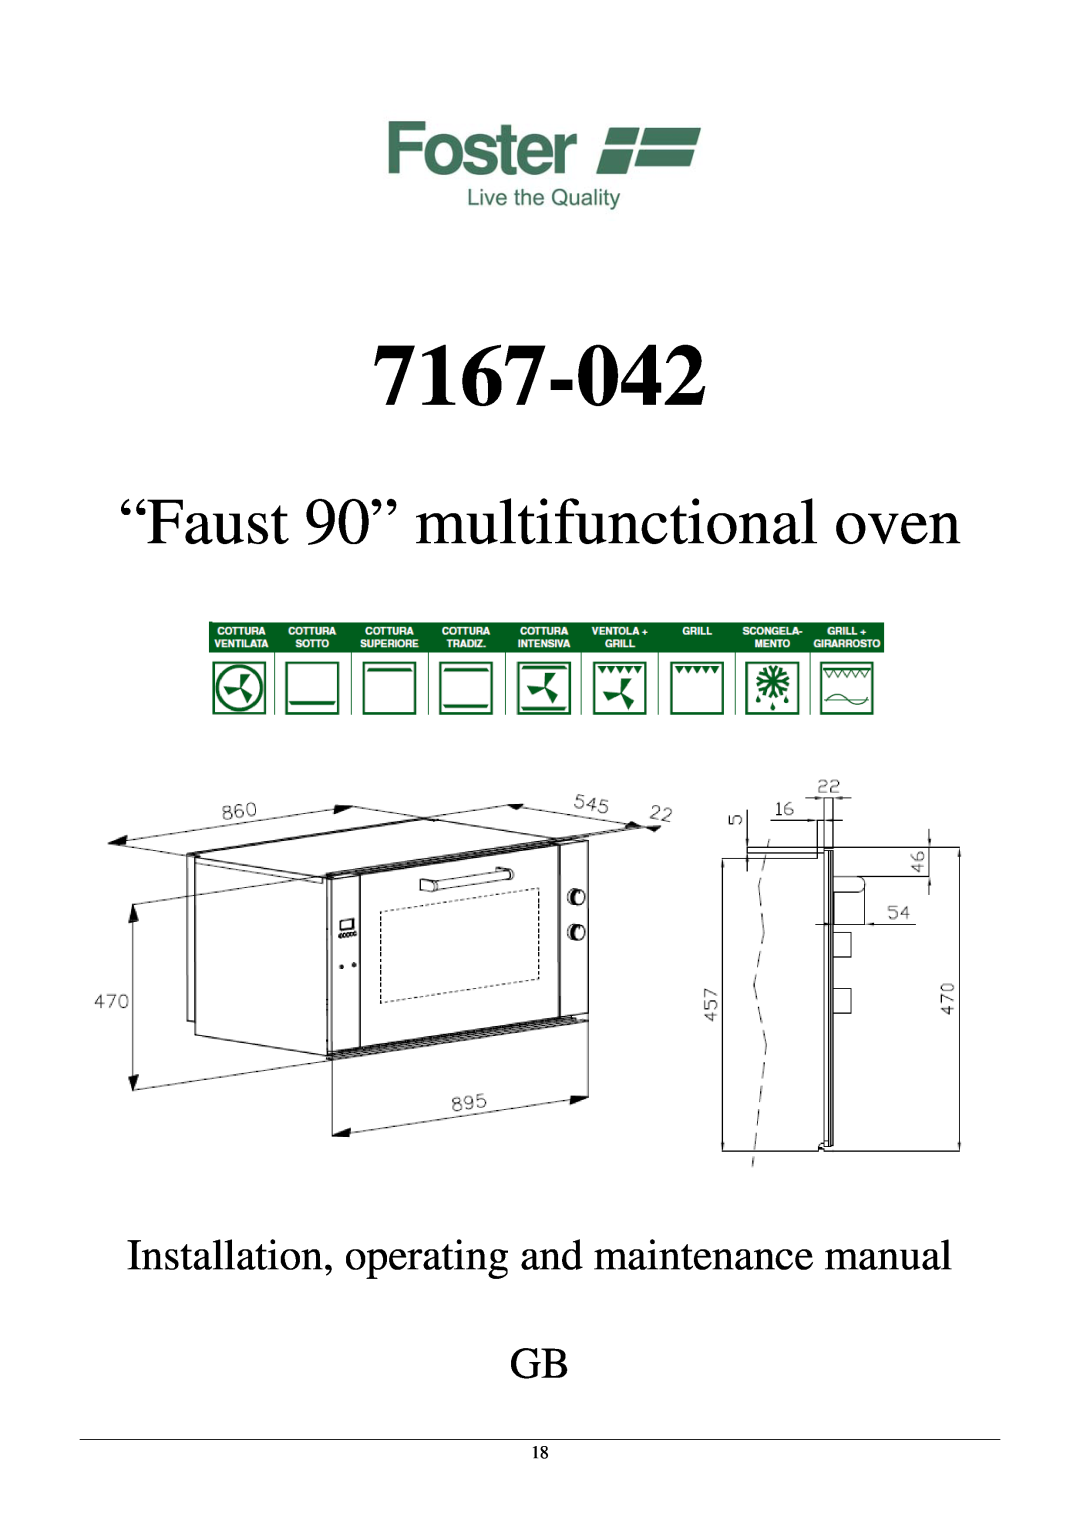 Foster 18 7167-042 manual “Faust 90” multifunctional oven, Installation, operating and maintenance manual GB 